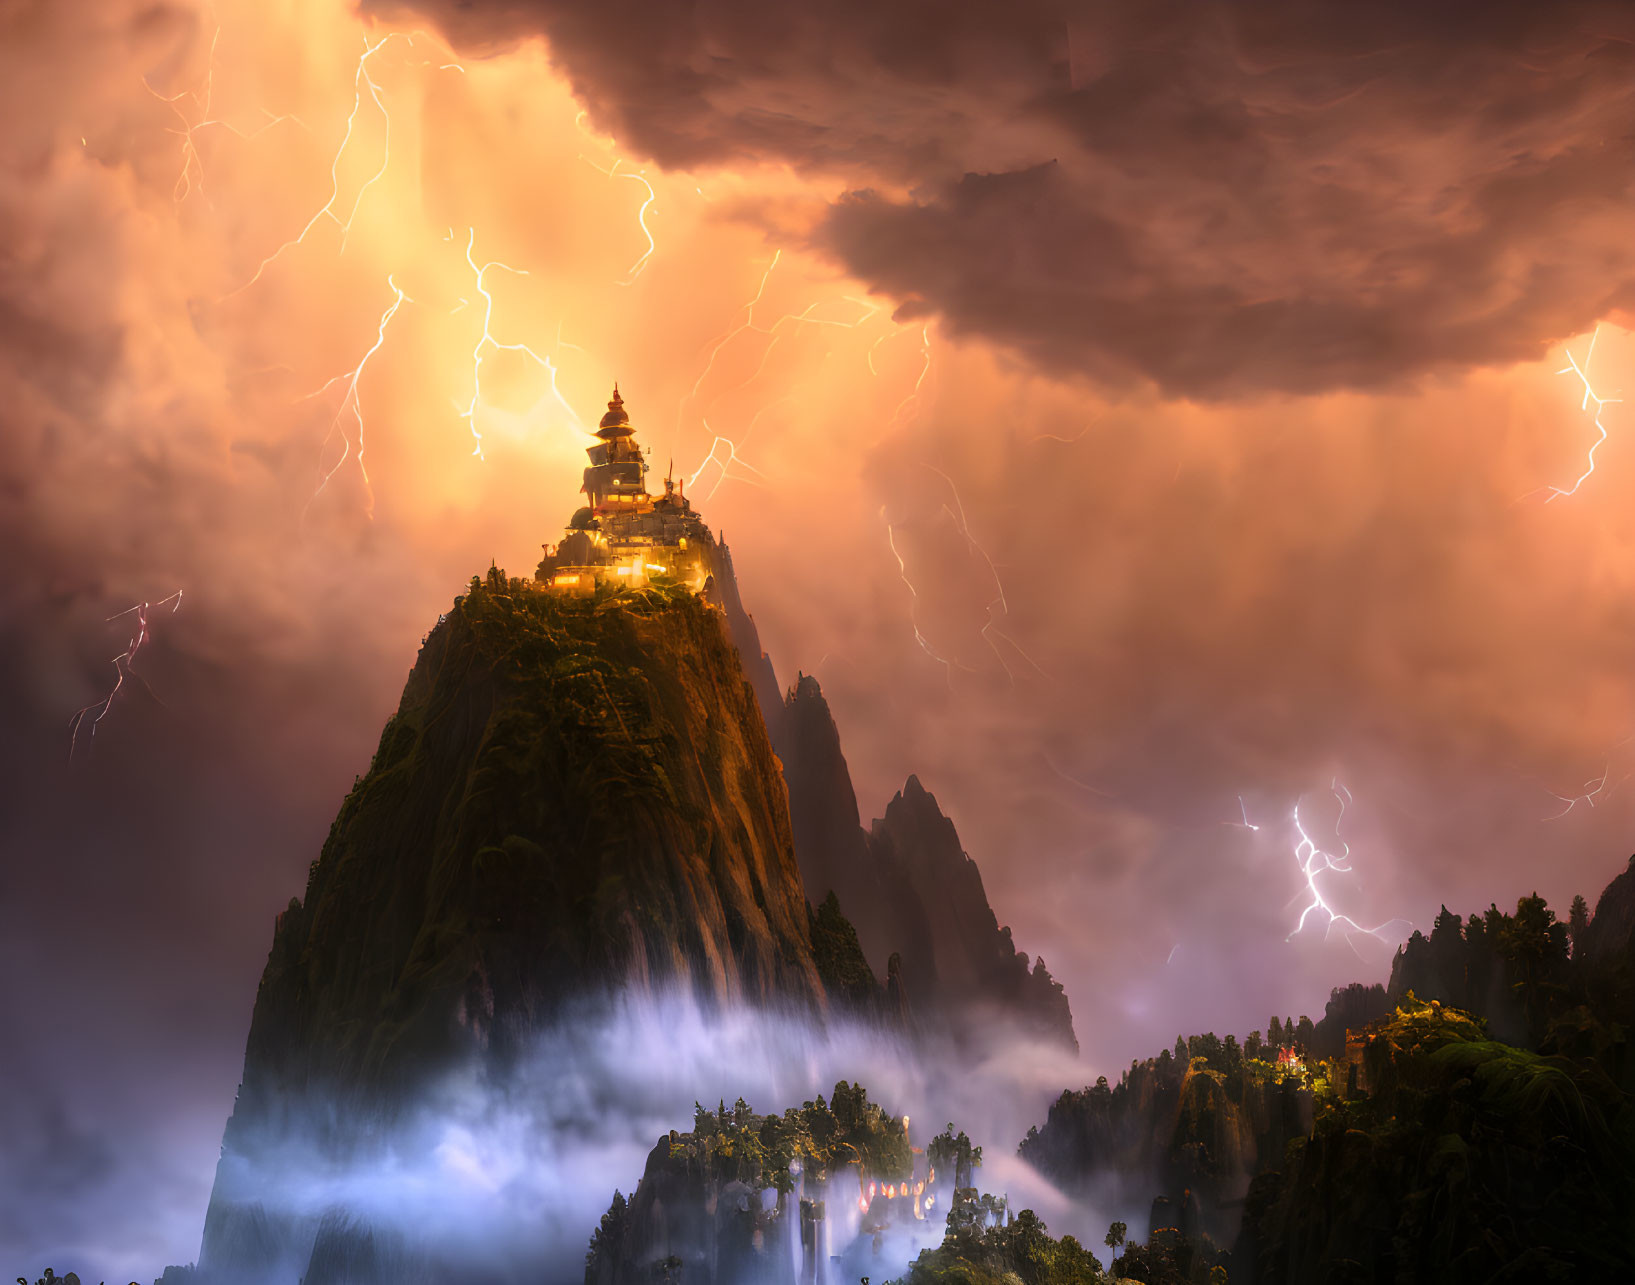 Temple on Steep Mountain in Stormy Sky